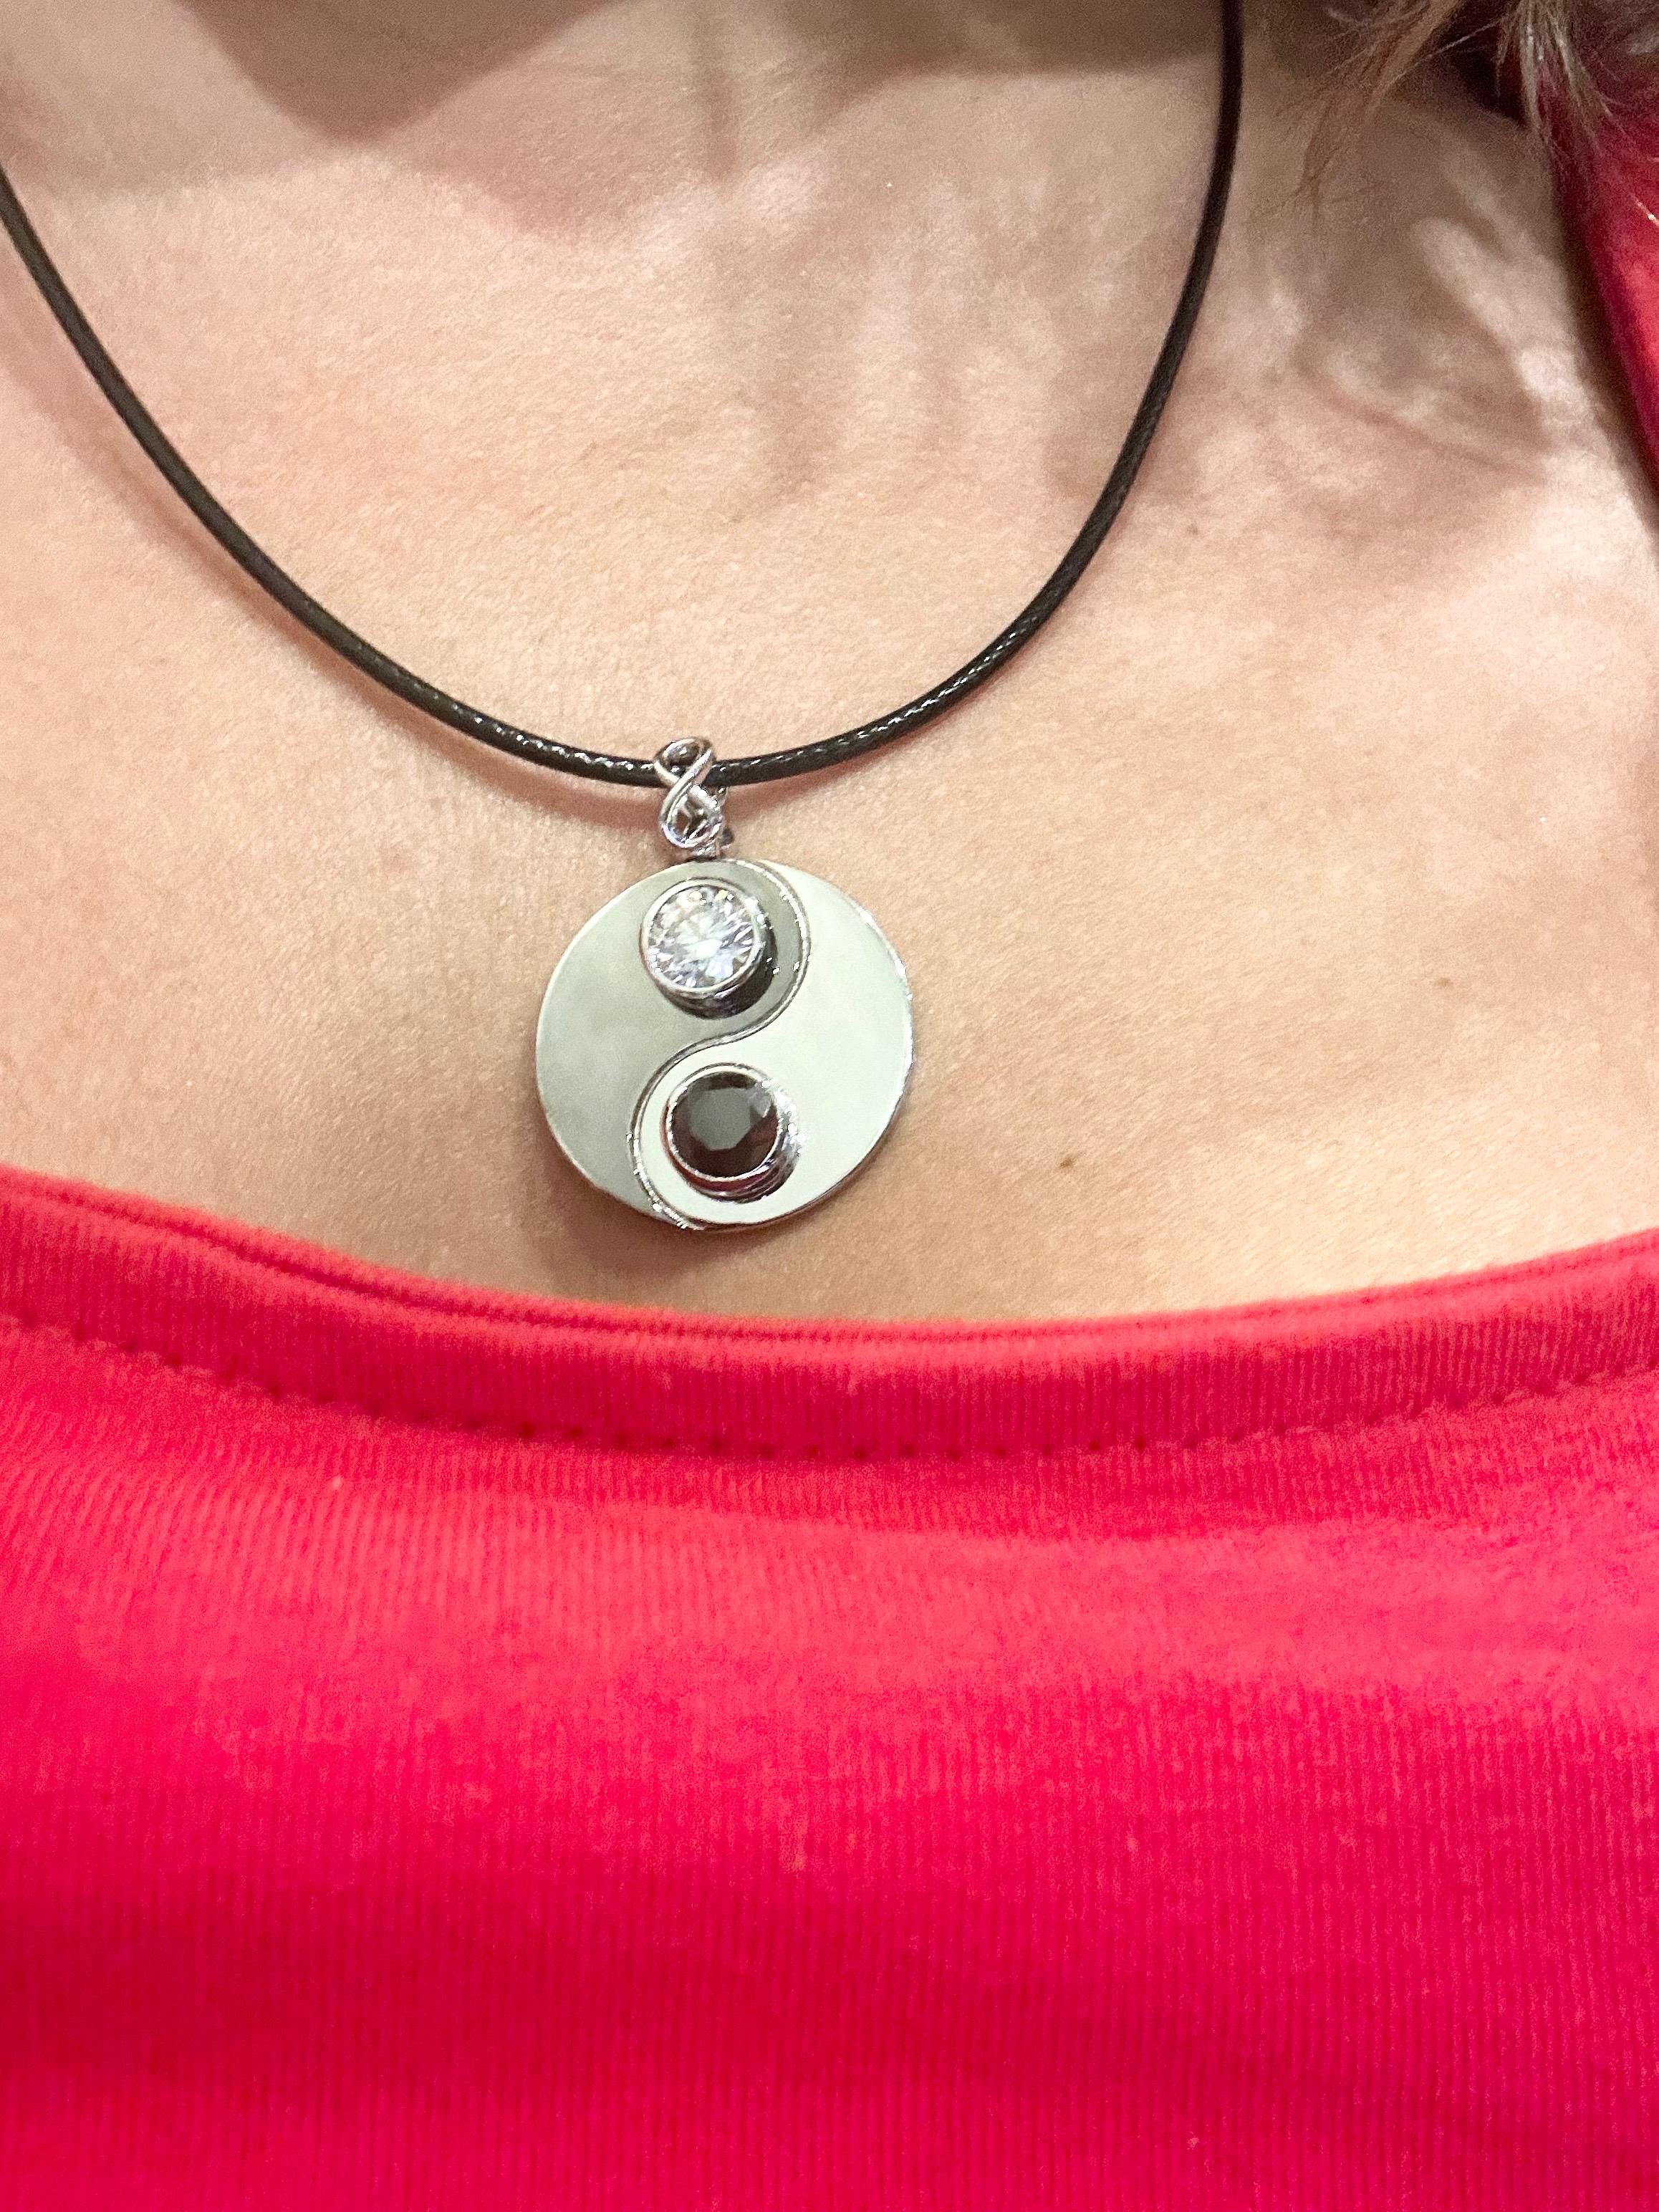 One of a kind pendant necklace made with 1.50ct black diamond and 1ct white diamond (Si clarity and G color) This Ying Yang pendant is made with white and black gold in 14KT. Comes with leather necklace 20